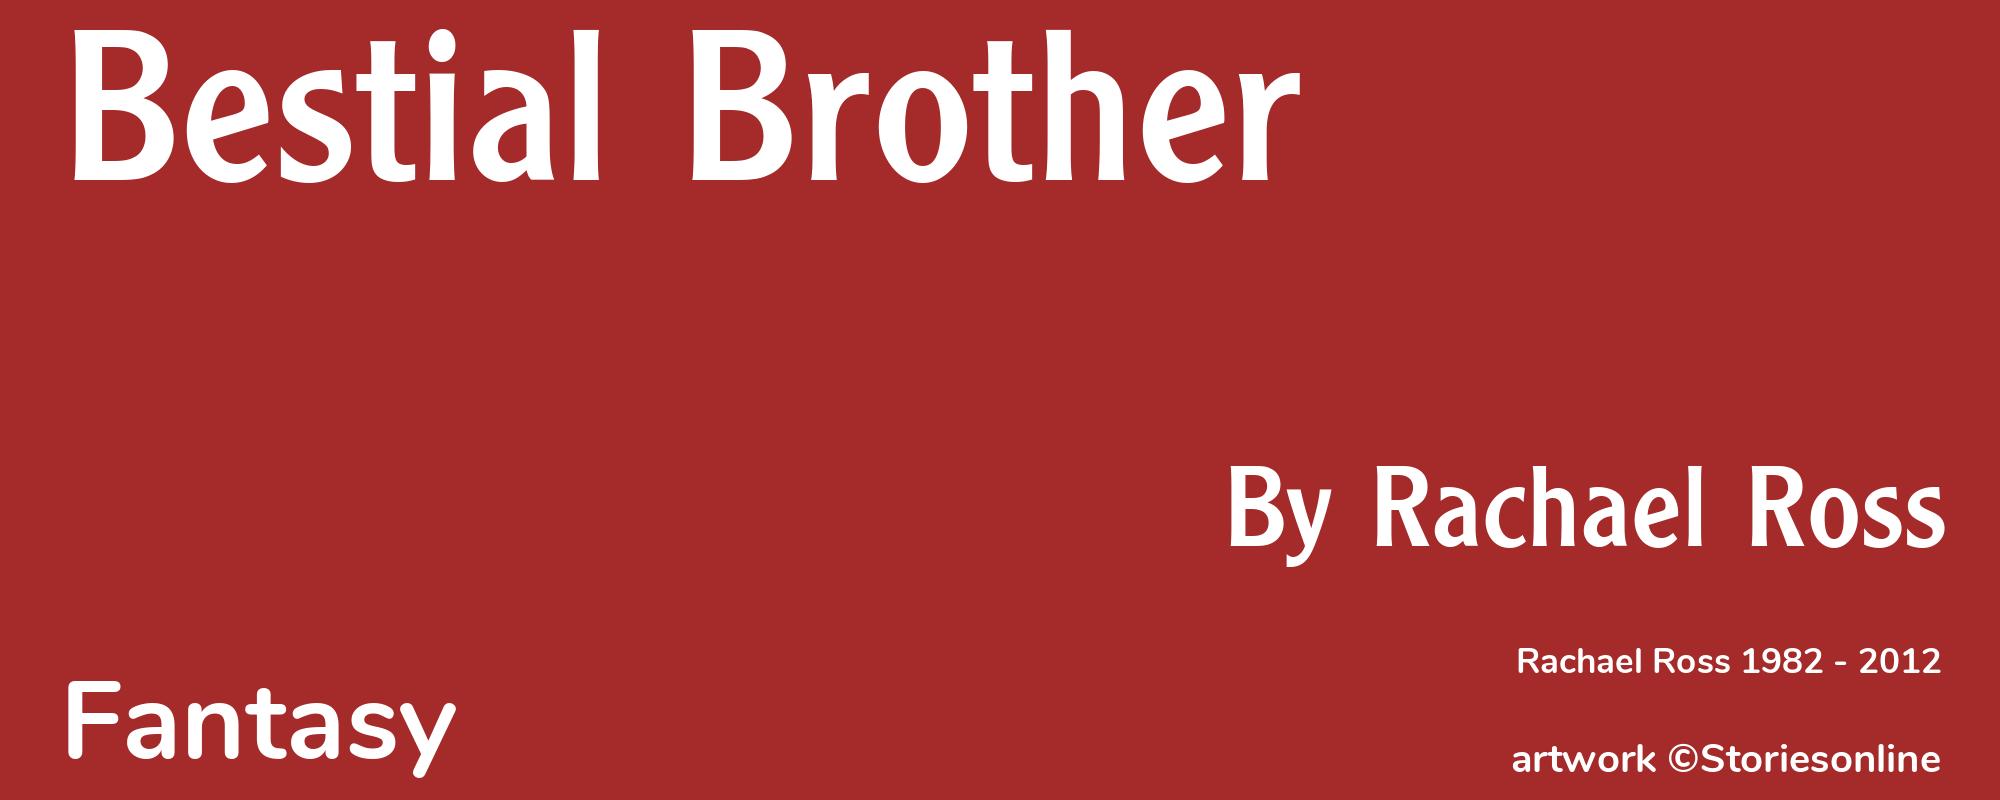 Bestial Brother - Cover